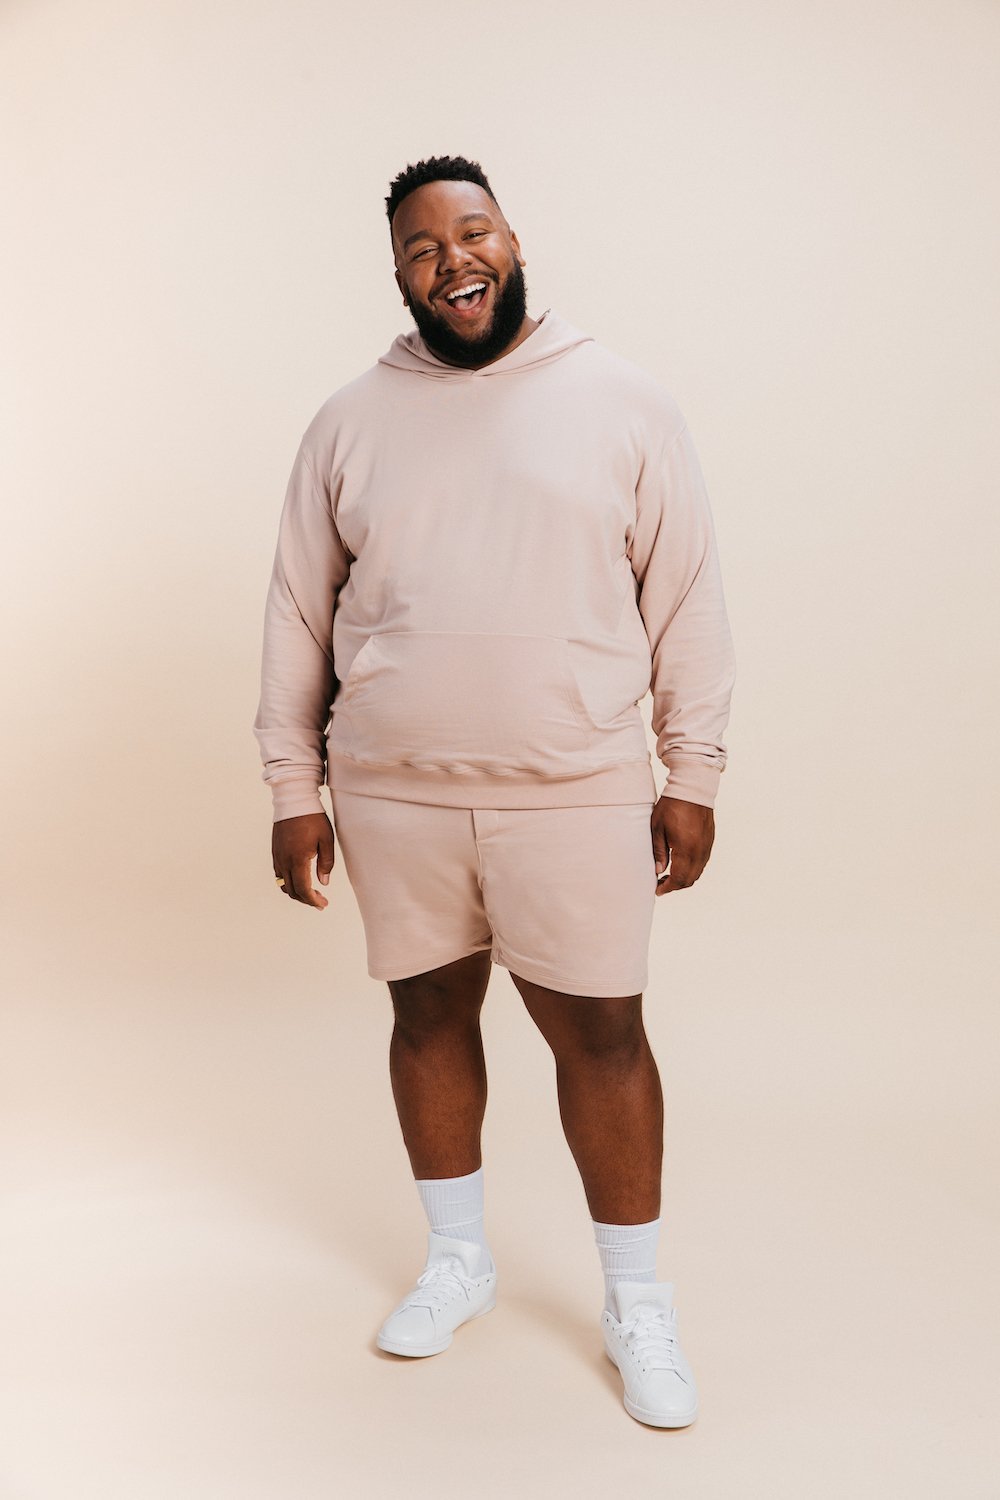 Ocio Delivers Comfort and Sustainability With Its Loungewear